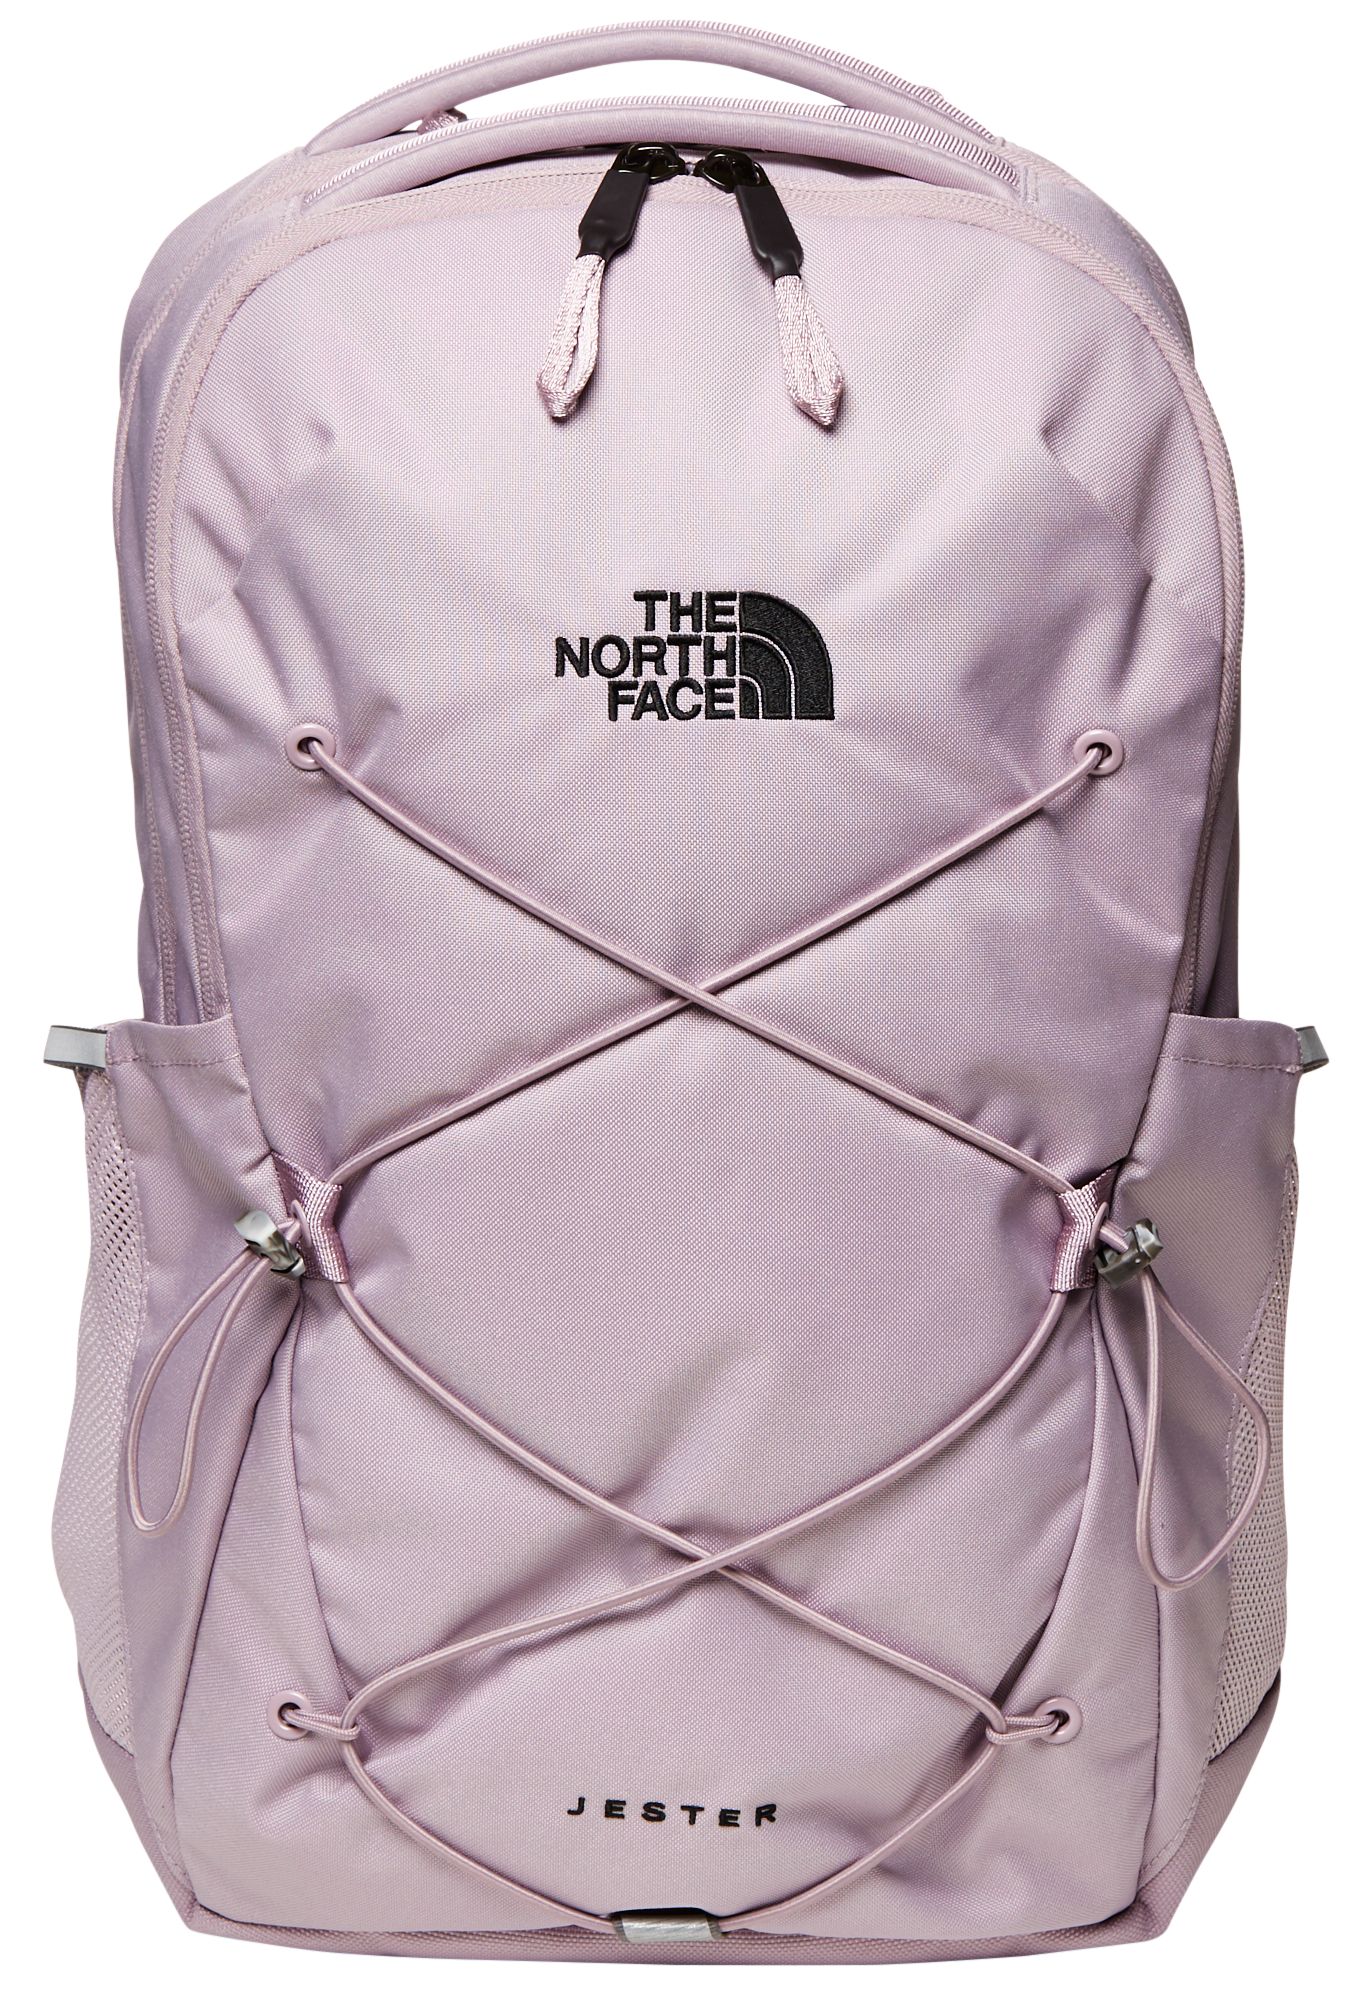 The North Face Jester Classic 20 Backpack